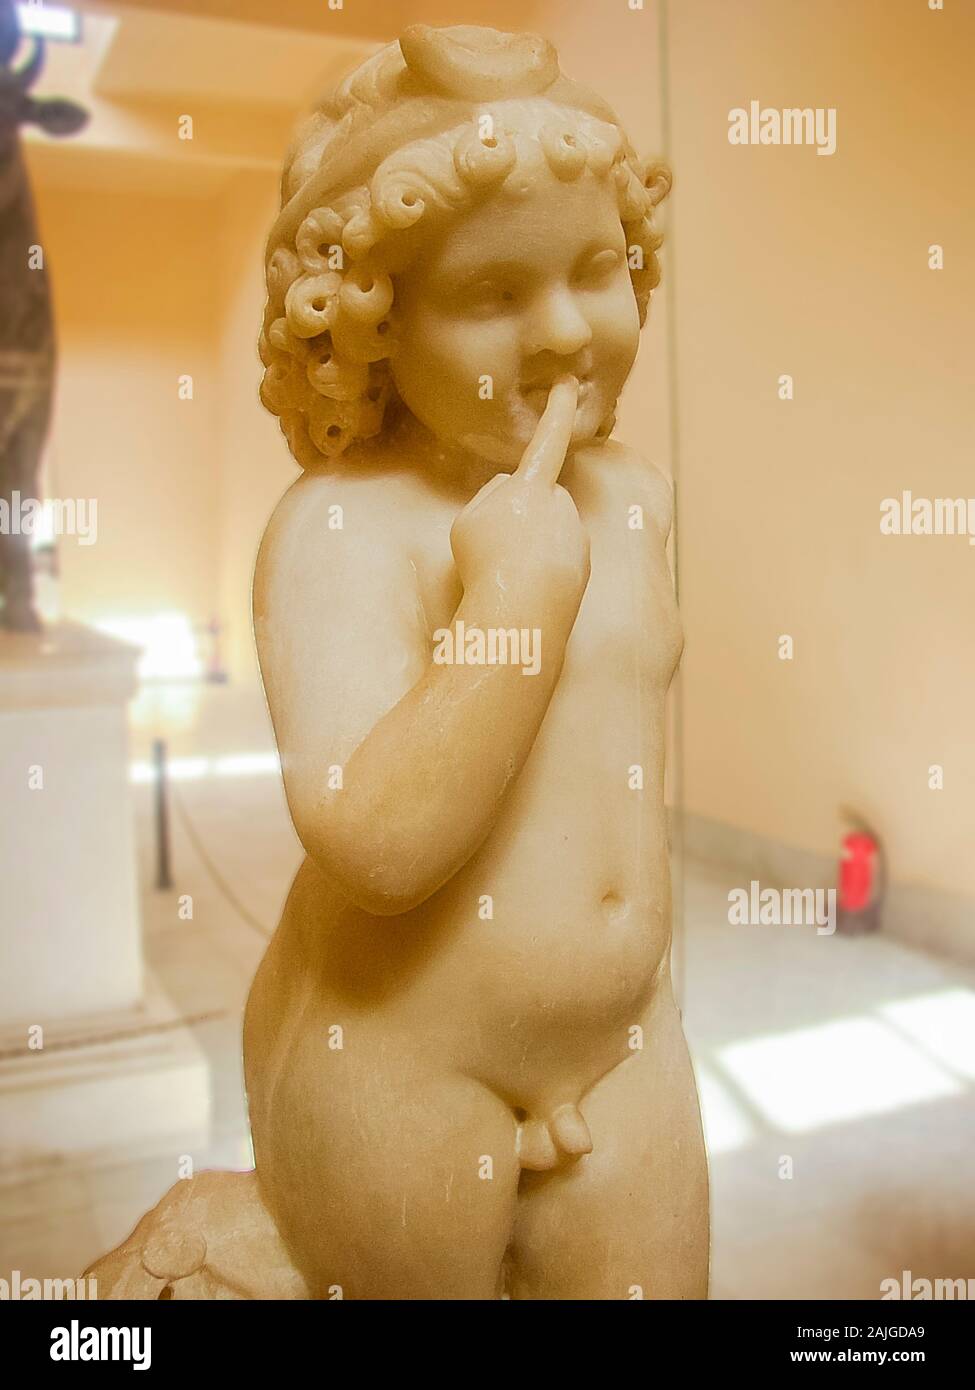 Egypt, Alexandria, Graeco-Roman Museum, statue of Harpocrates. The style is Greek, but the finger in the mouth is Egyptian and is a mark of childhood. Stock Photo